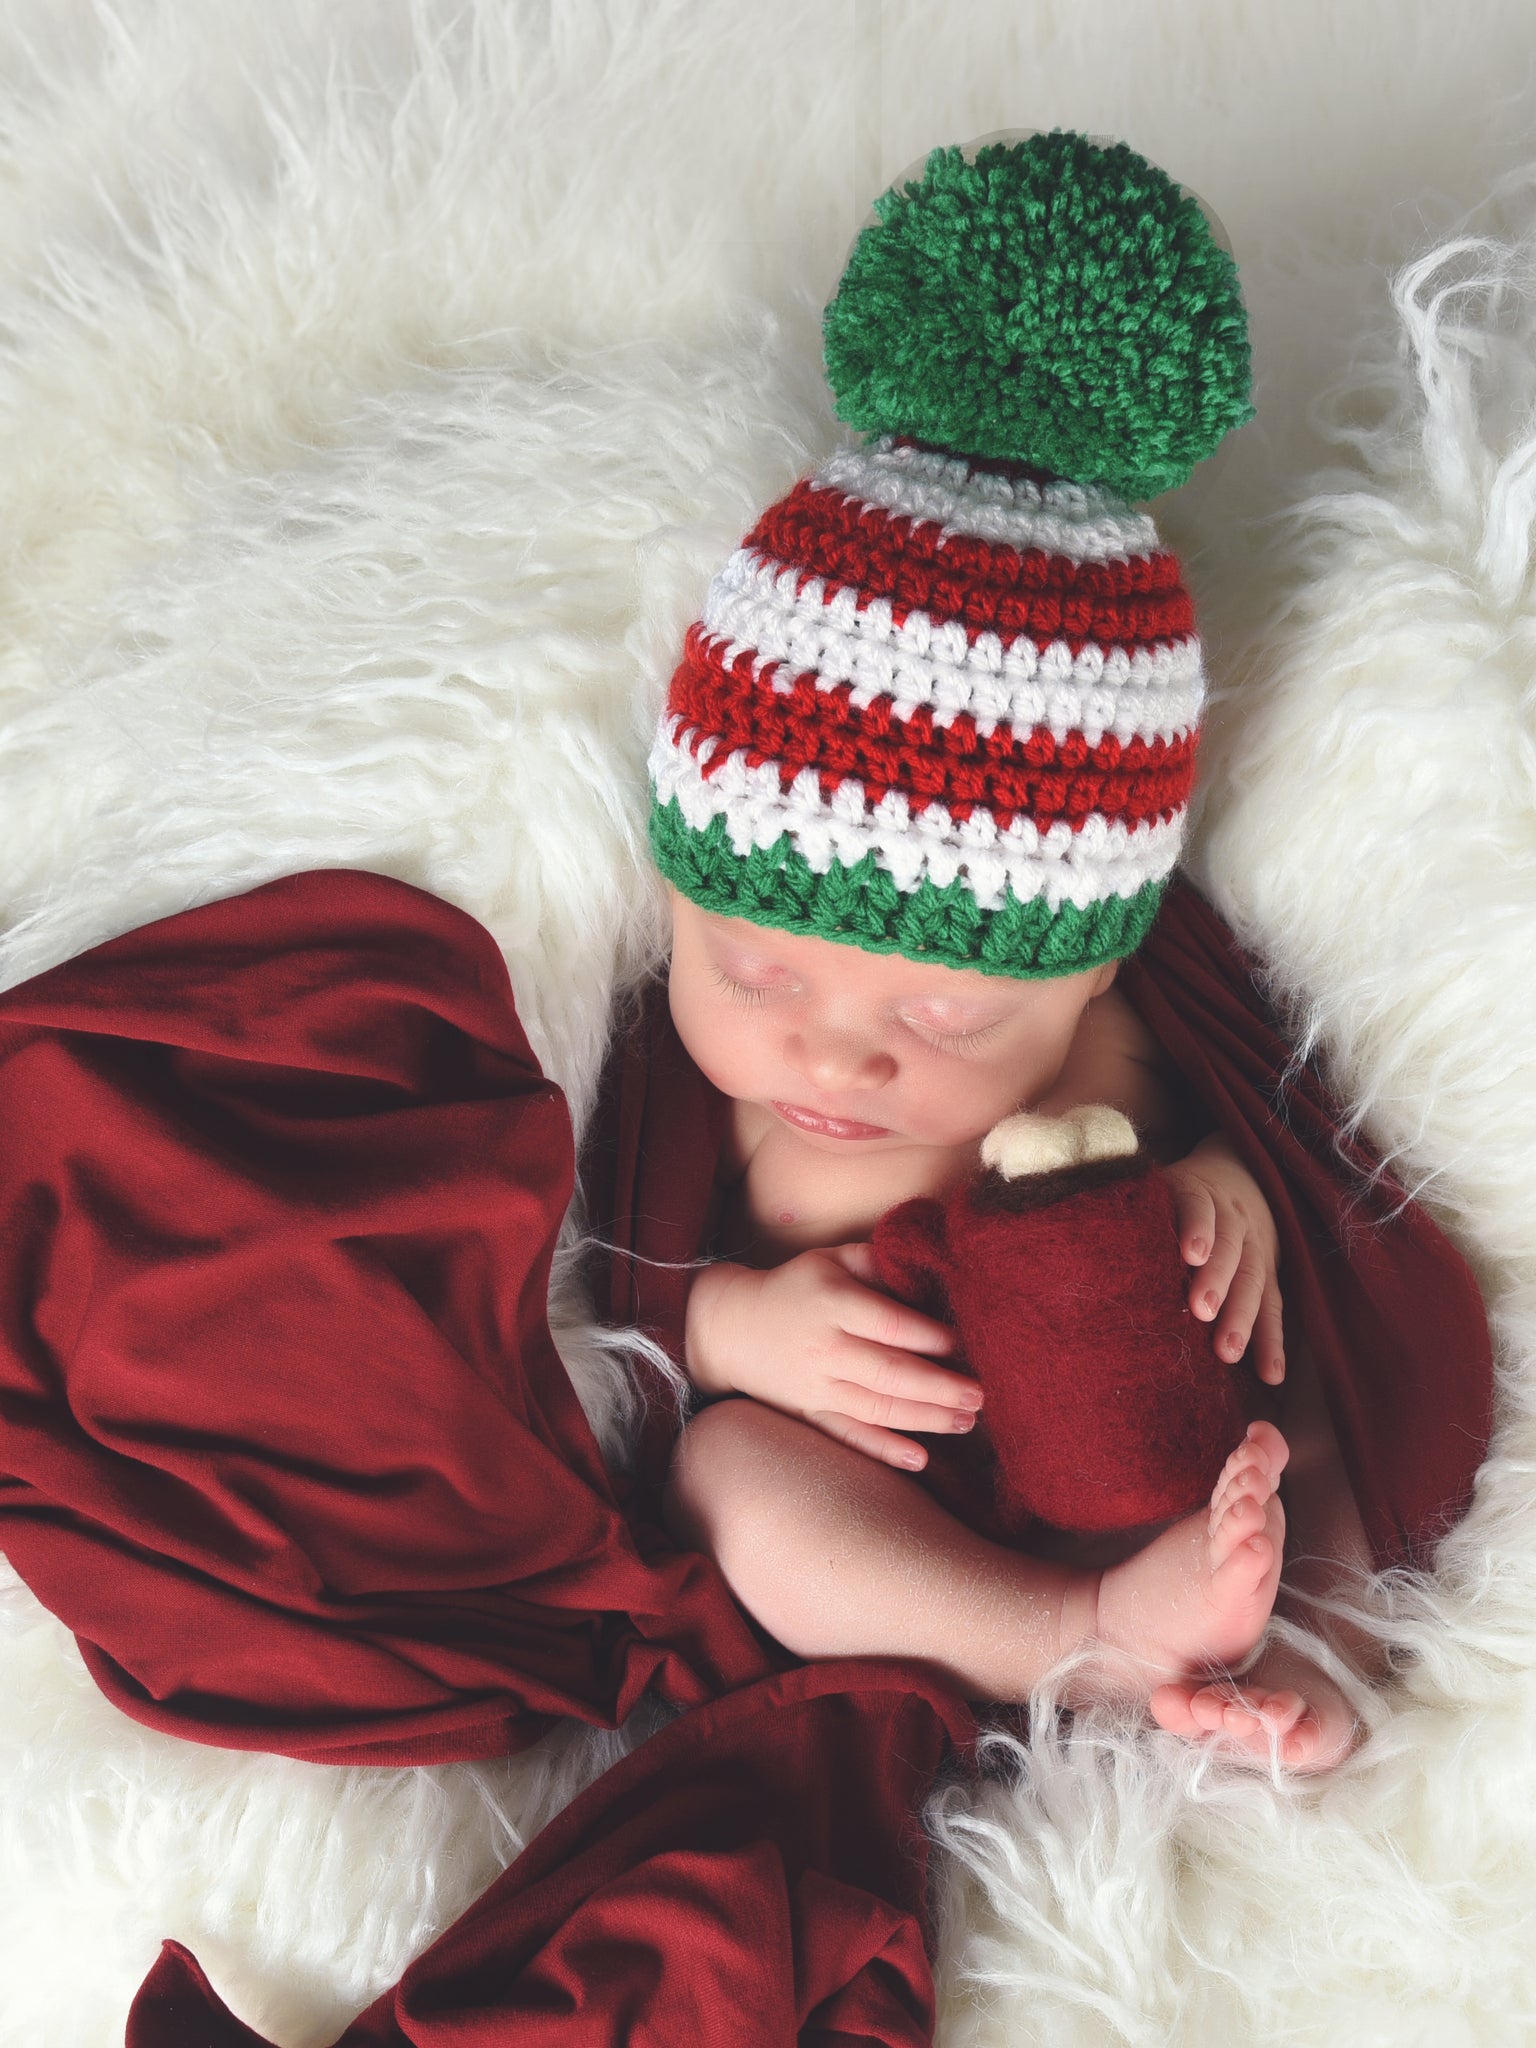 Red & white striped Christmas hat with giant green pom pom by Two Seaside Babes